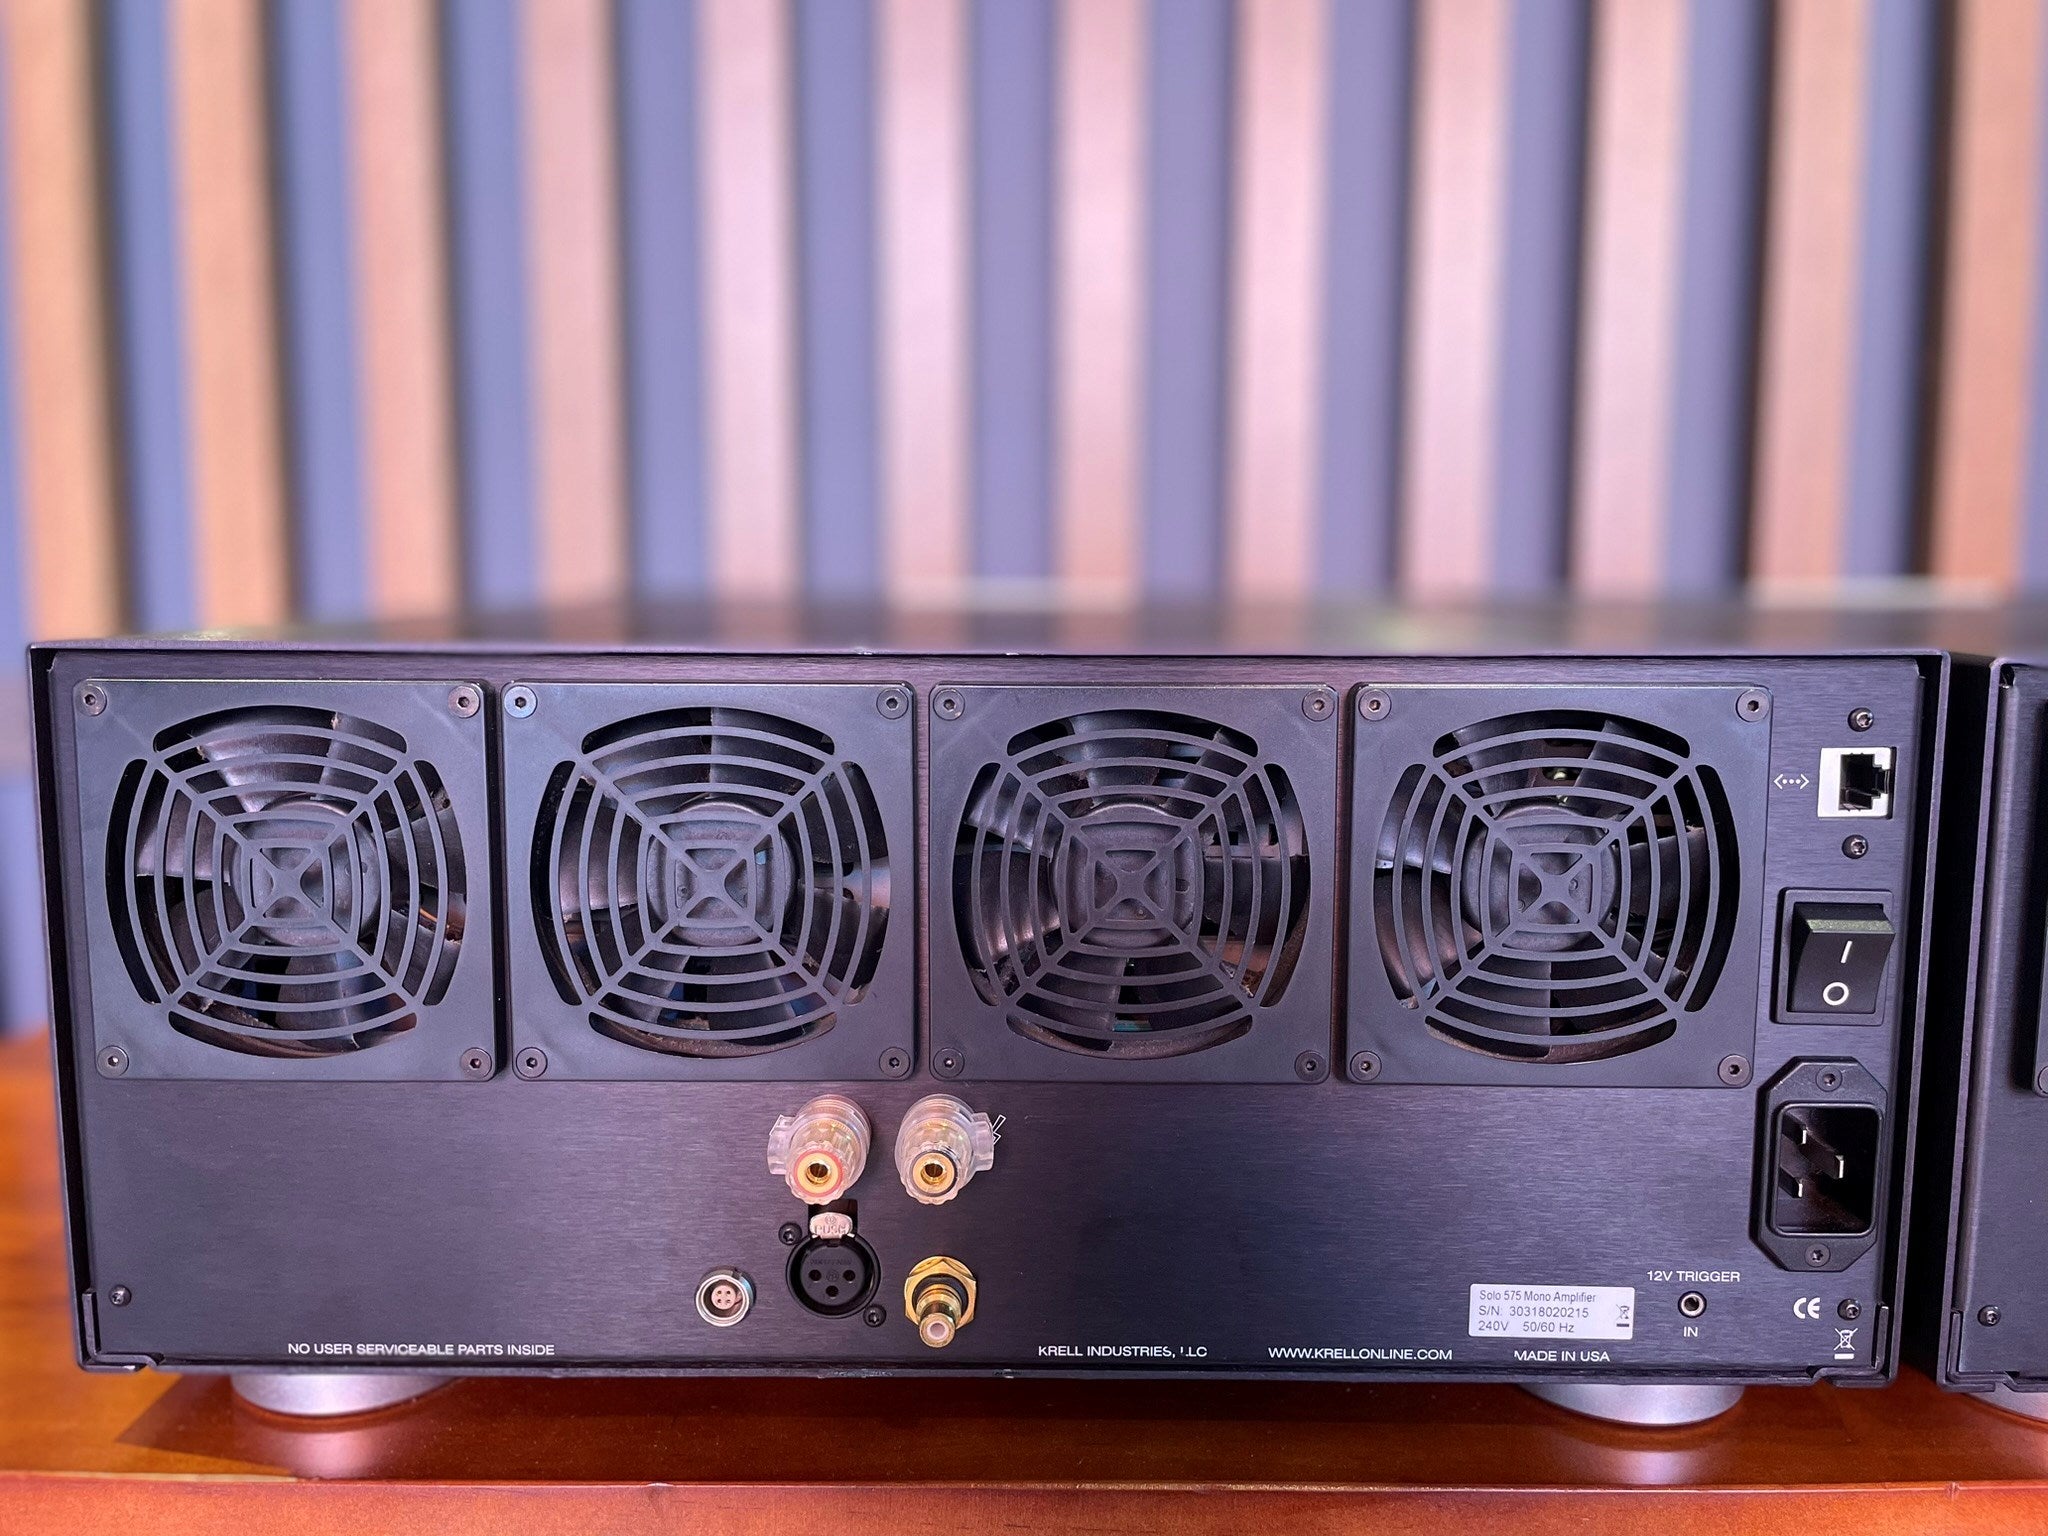 Krell Solo 575 XD Mono Amplifiers Pair - As Traded